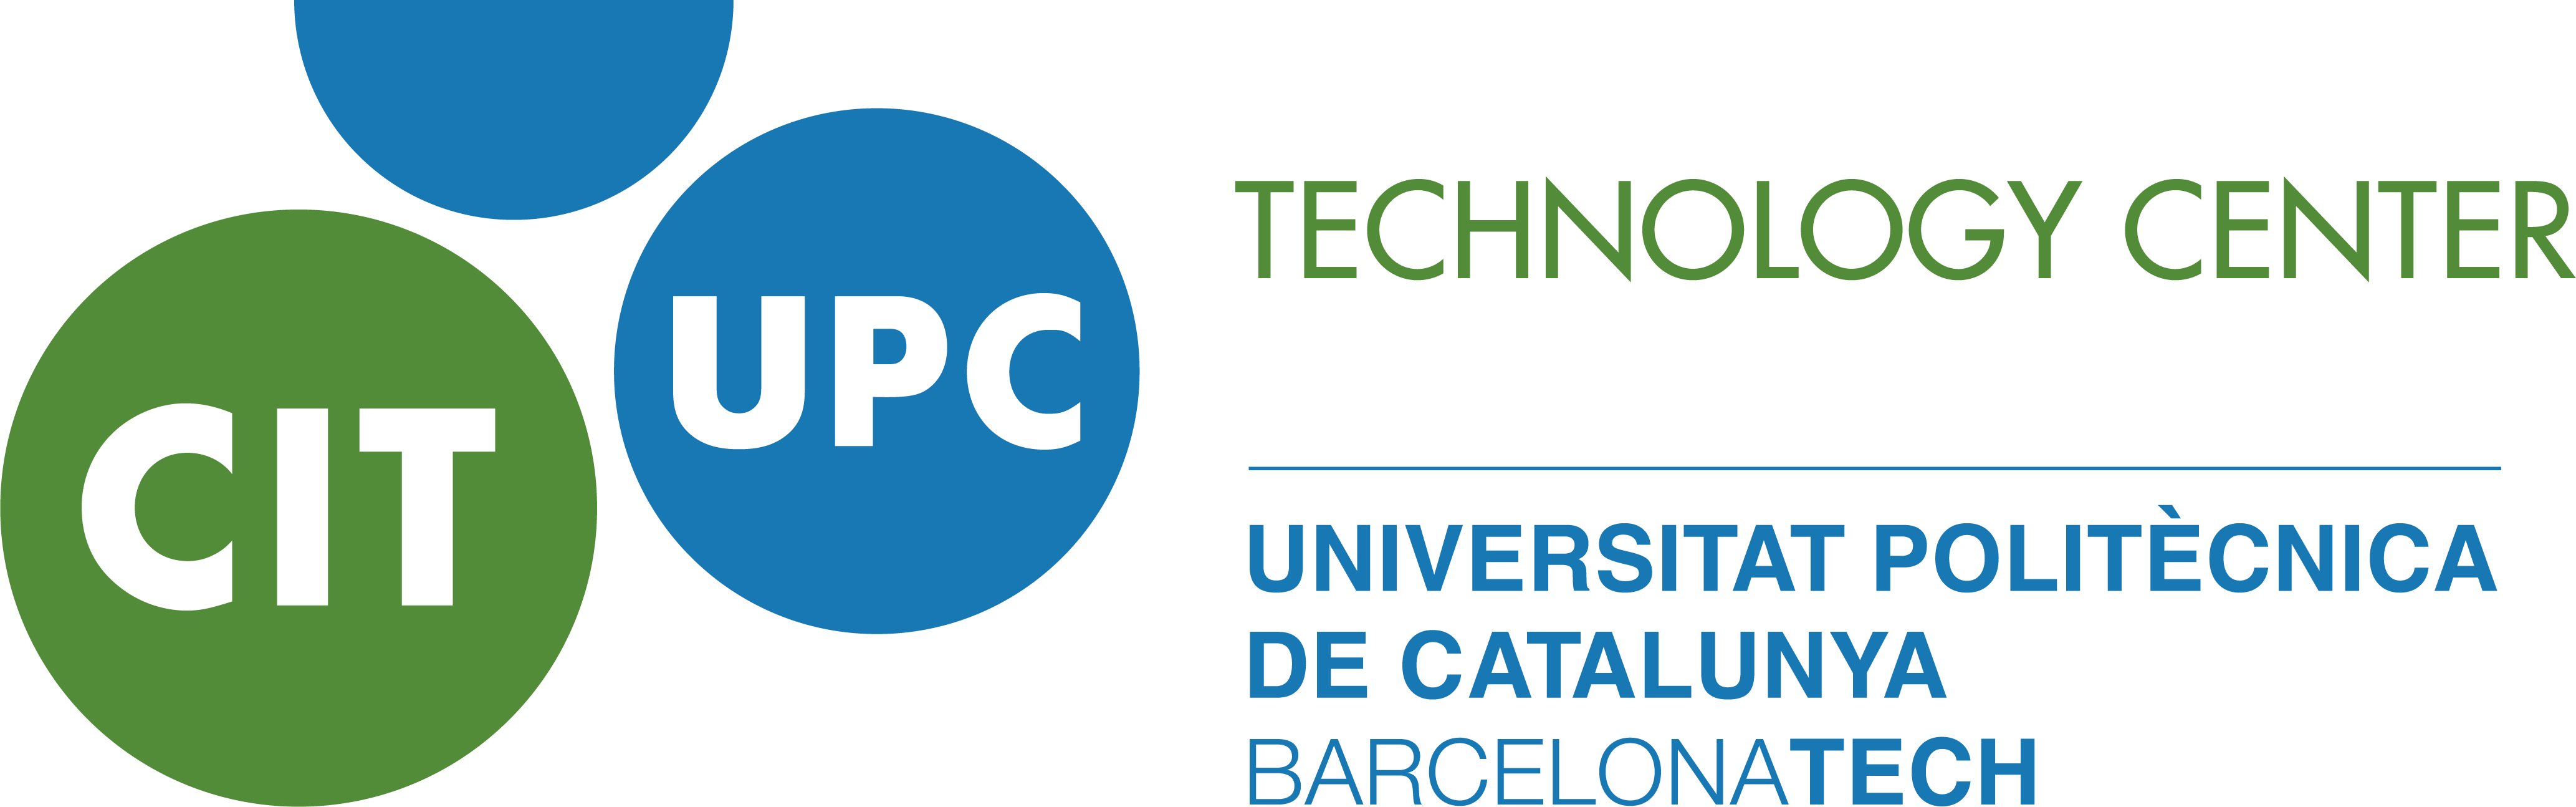 The UPC launches on online platform to meet technology demands associated with COVID-19